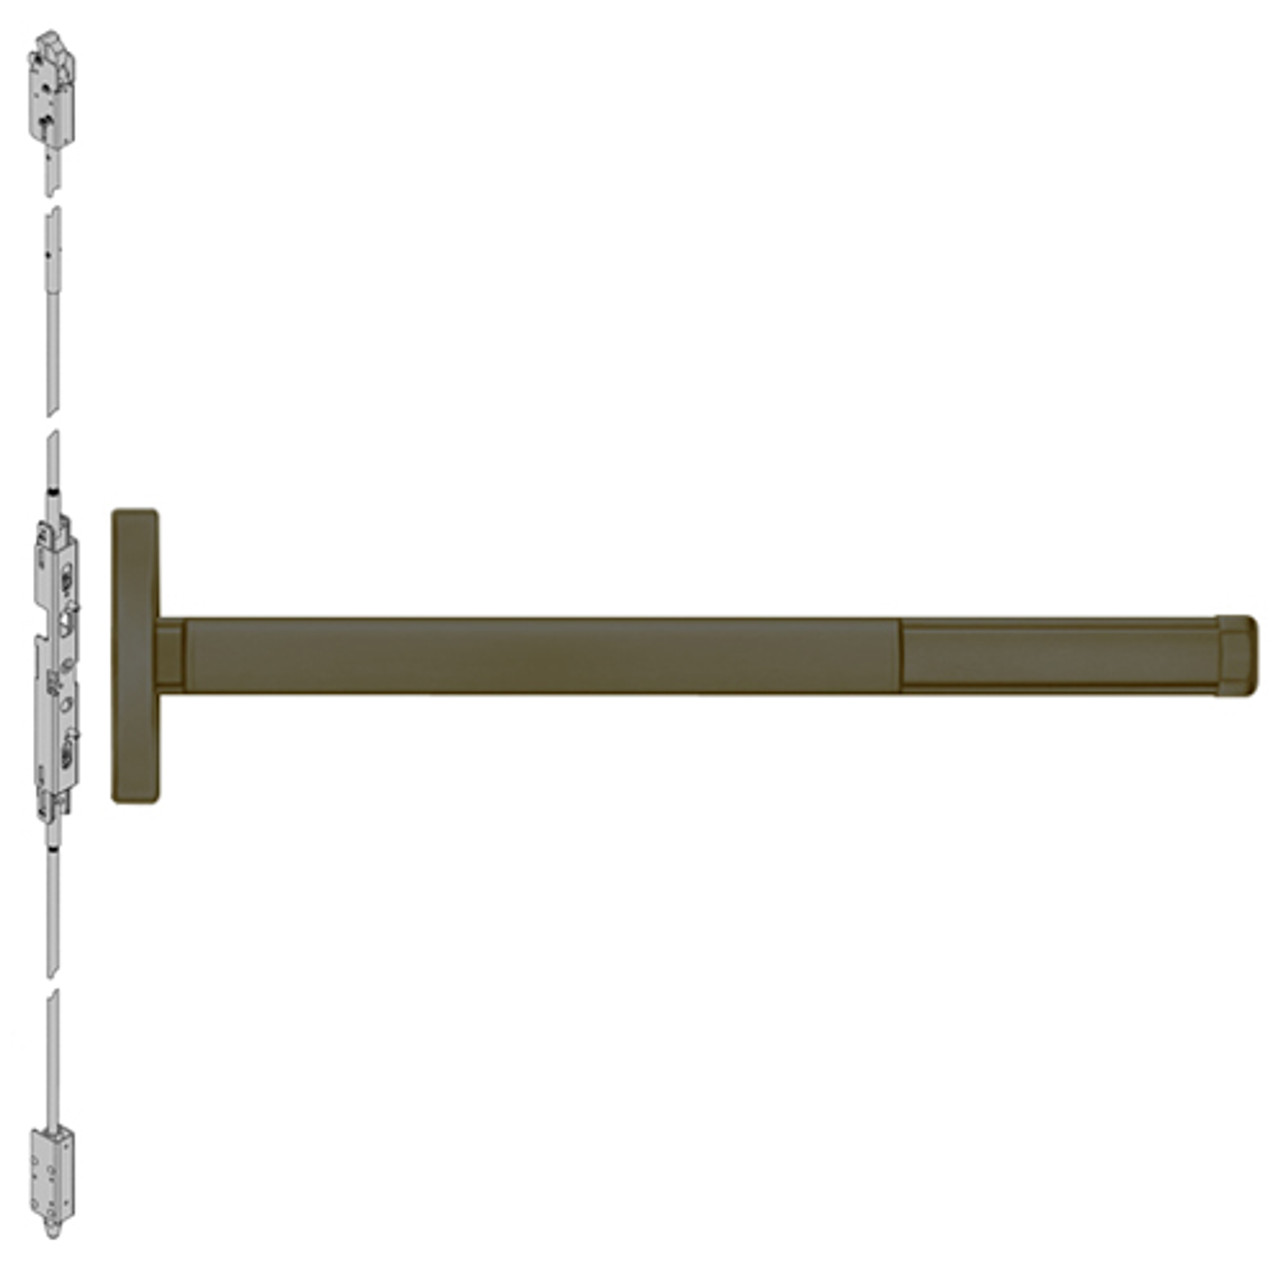 FL2614LBR-613-36 PHI 2600 Series Fire Rated Concealed Vertical Rod Exit Device Prepped for Lever Always Active with Less Bottom Rod in Oil Rubbed Bronze Finish